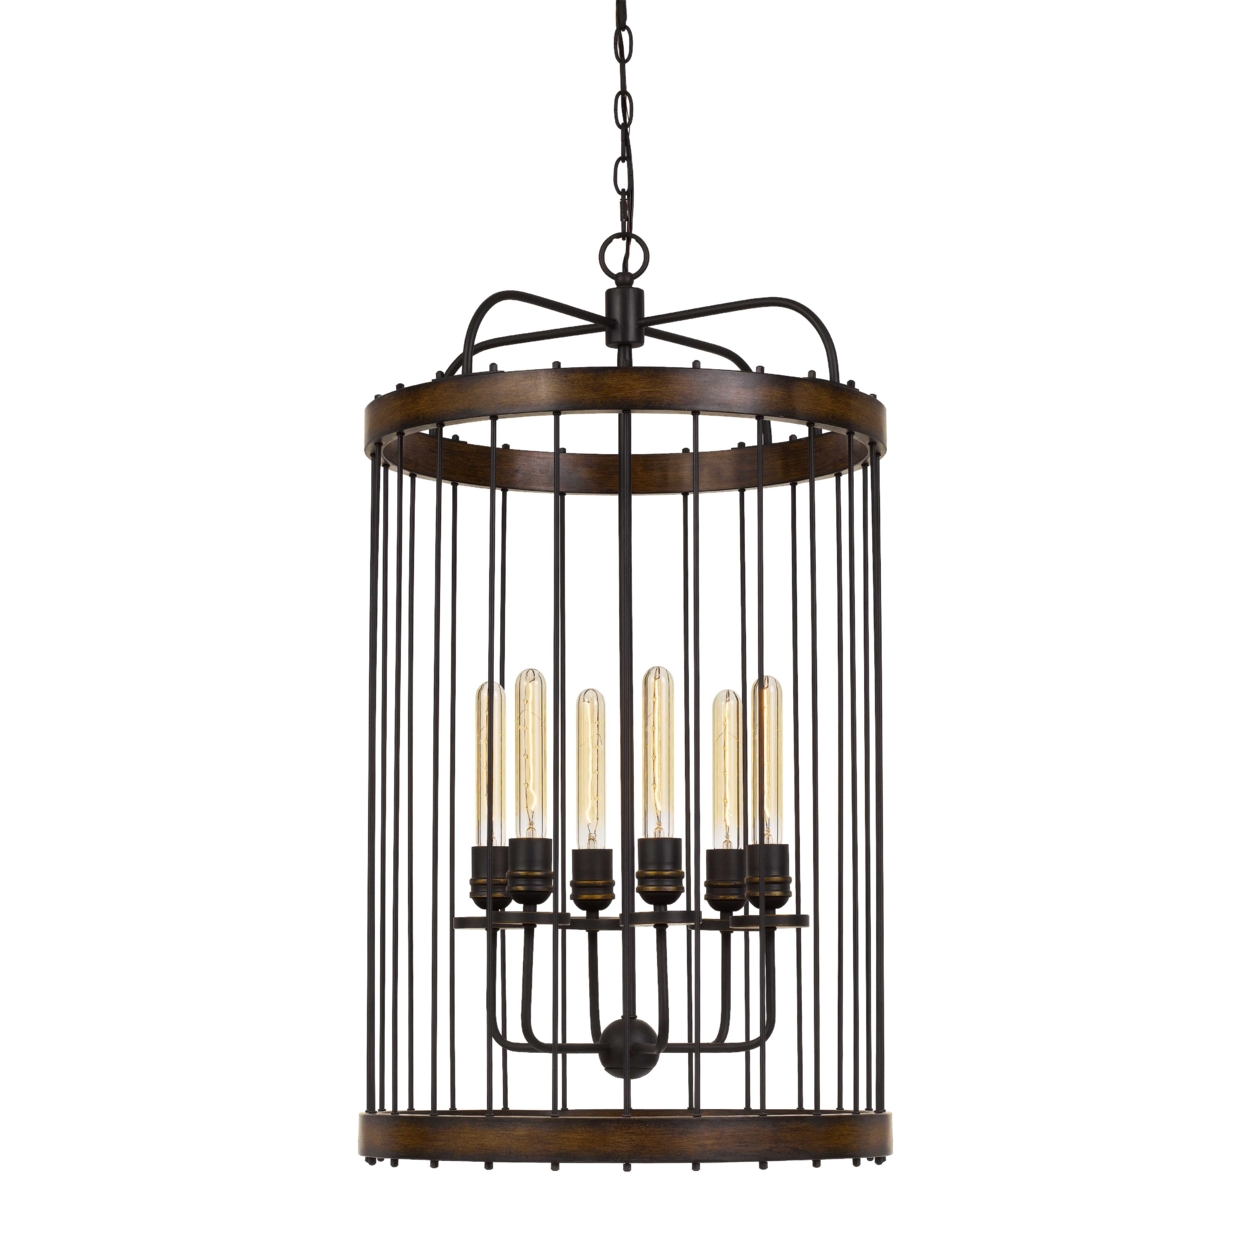 Round Metal And Wooden Frame Chandelier With Cage Design, Brown And Black- Saltoro Sherpi